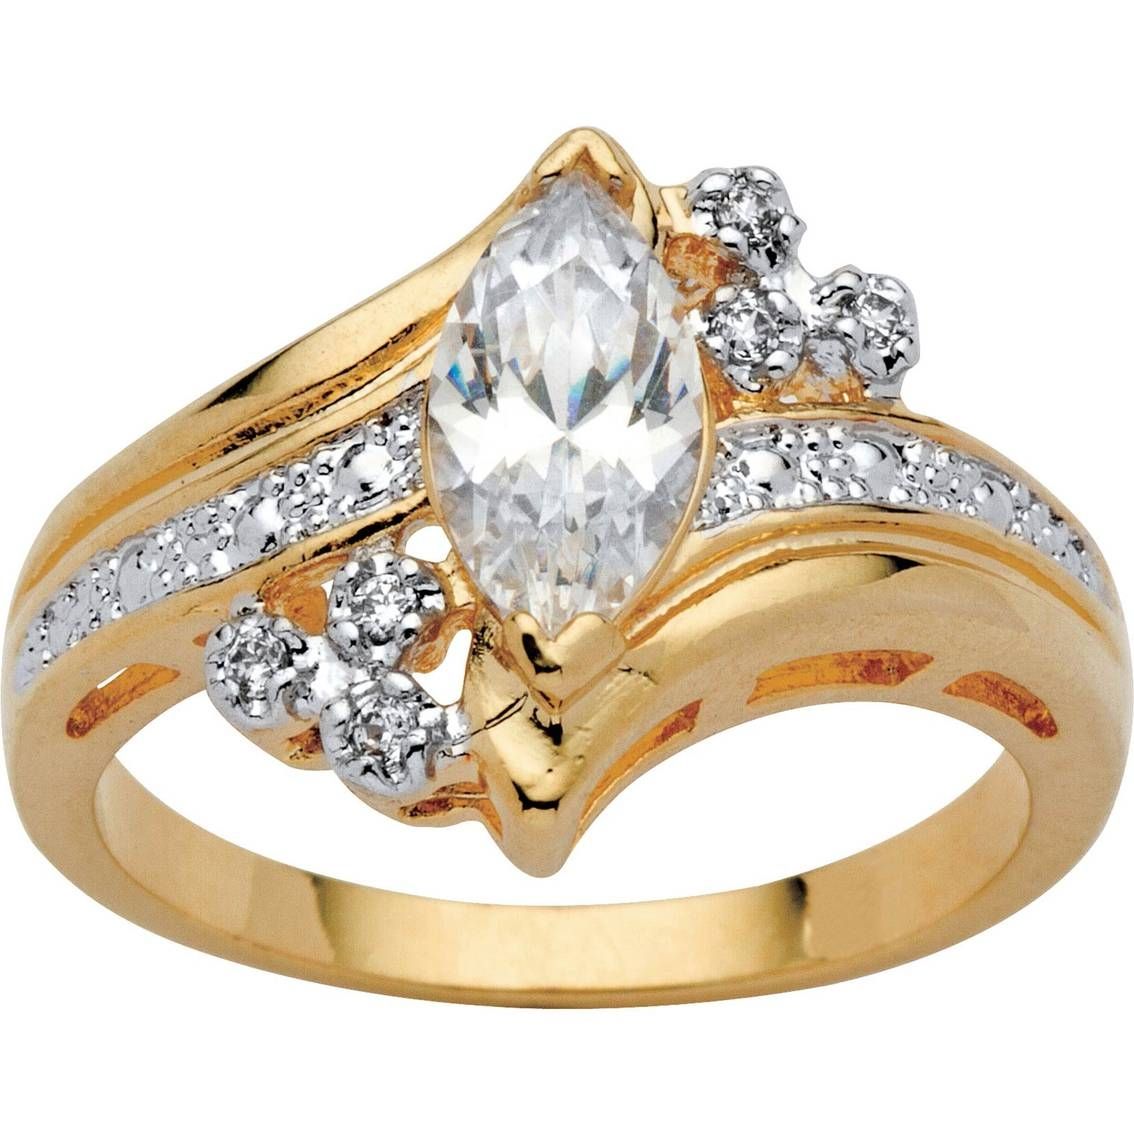 Palmbeach 14k Yellow Gold Plated Marquise Cut Cubic Zirconia With Regard To Newest Marquise Cut Diamond Anniversary Rings (View 14 of 25)